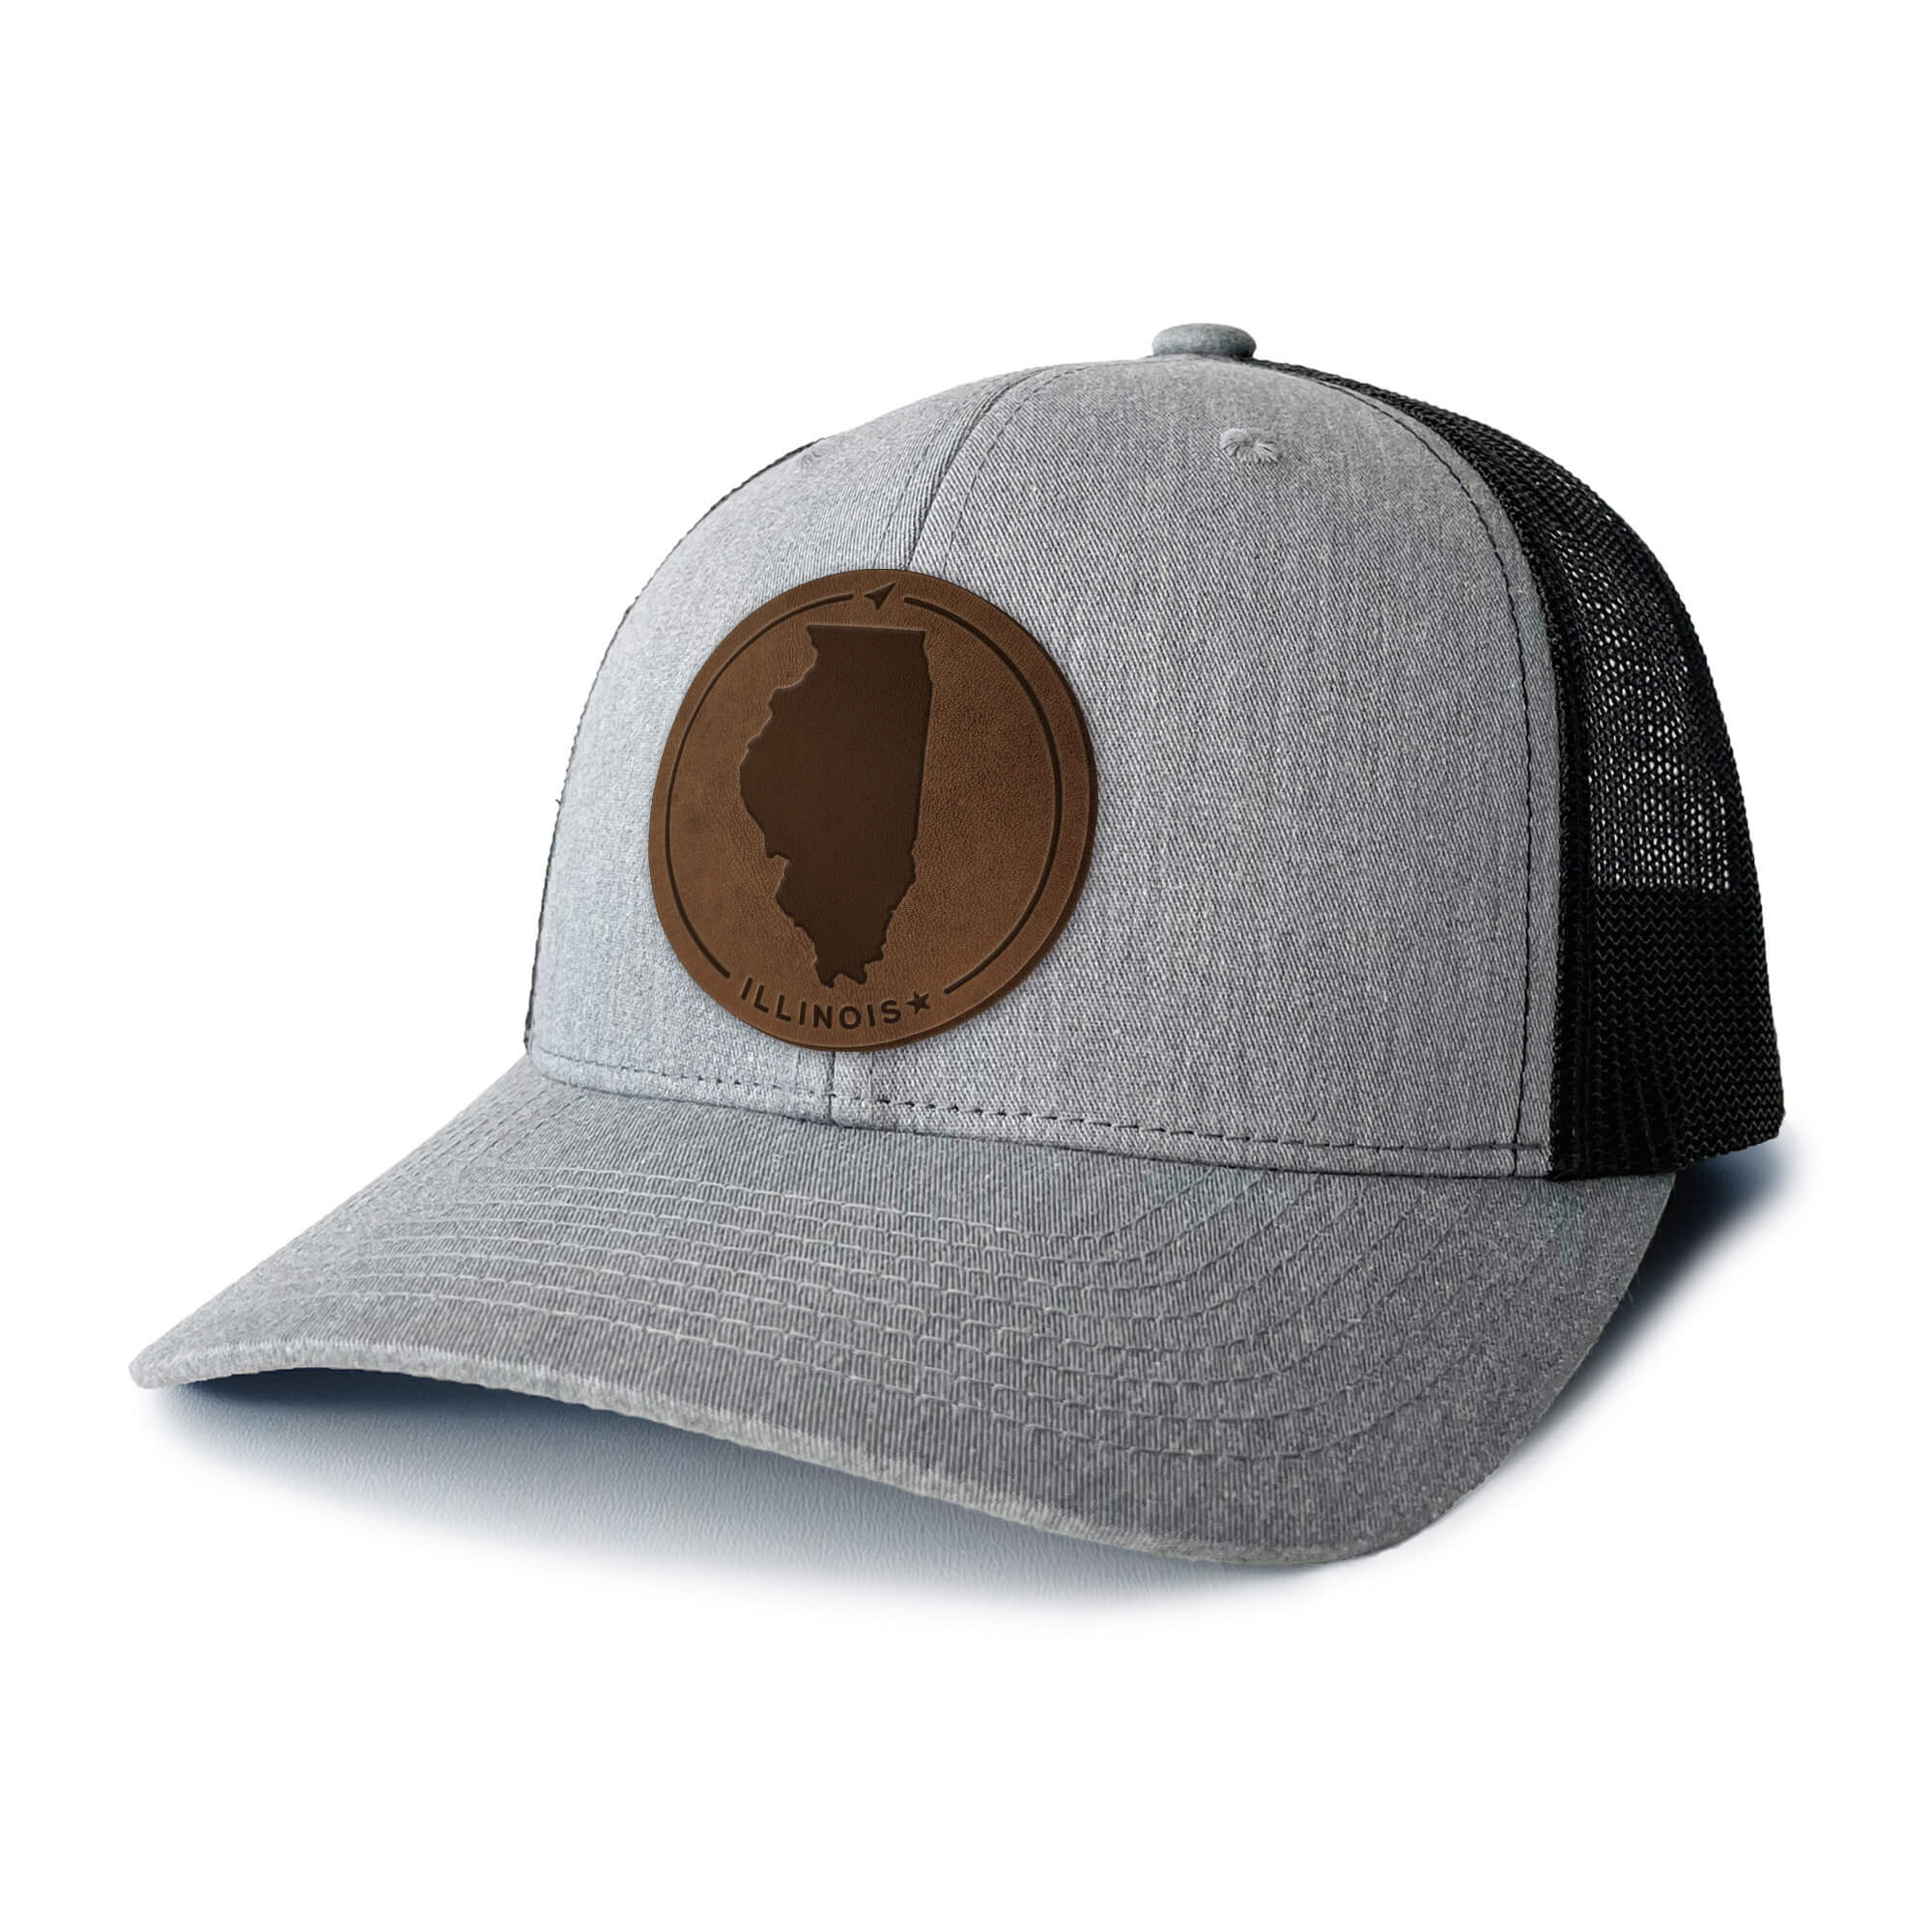 Illinois Leather Patch Hat